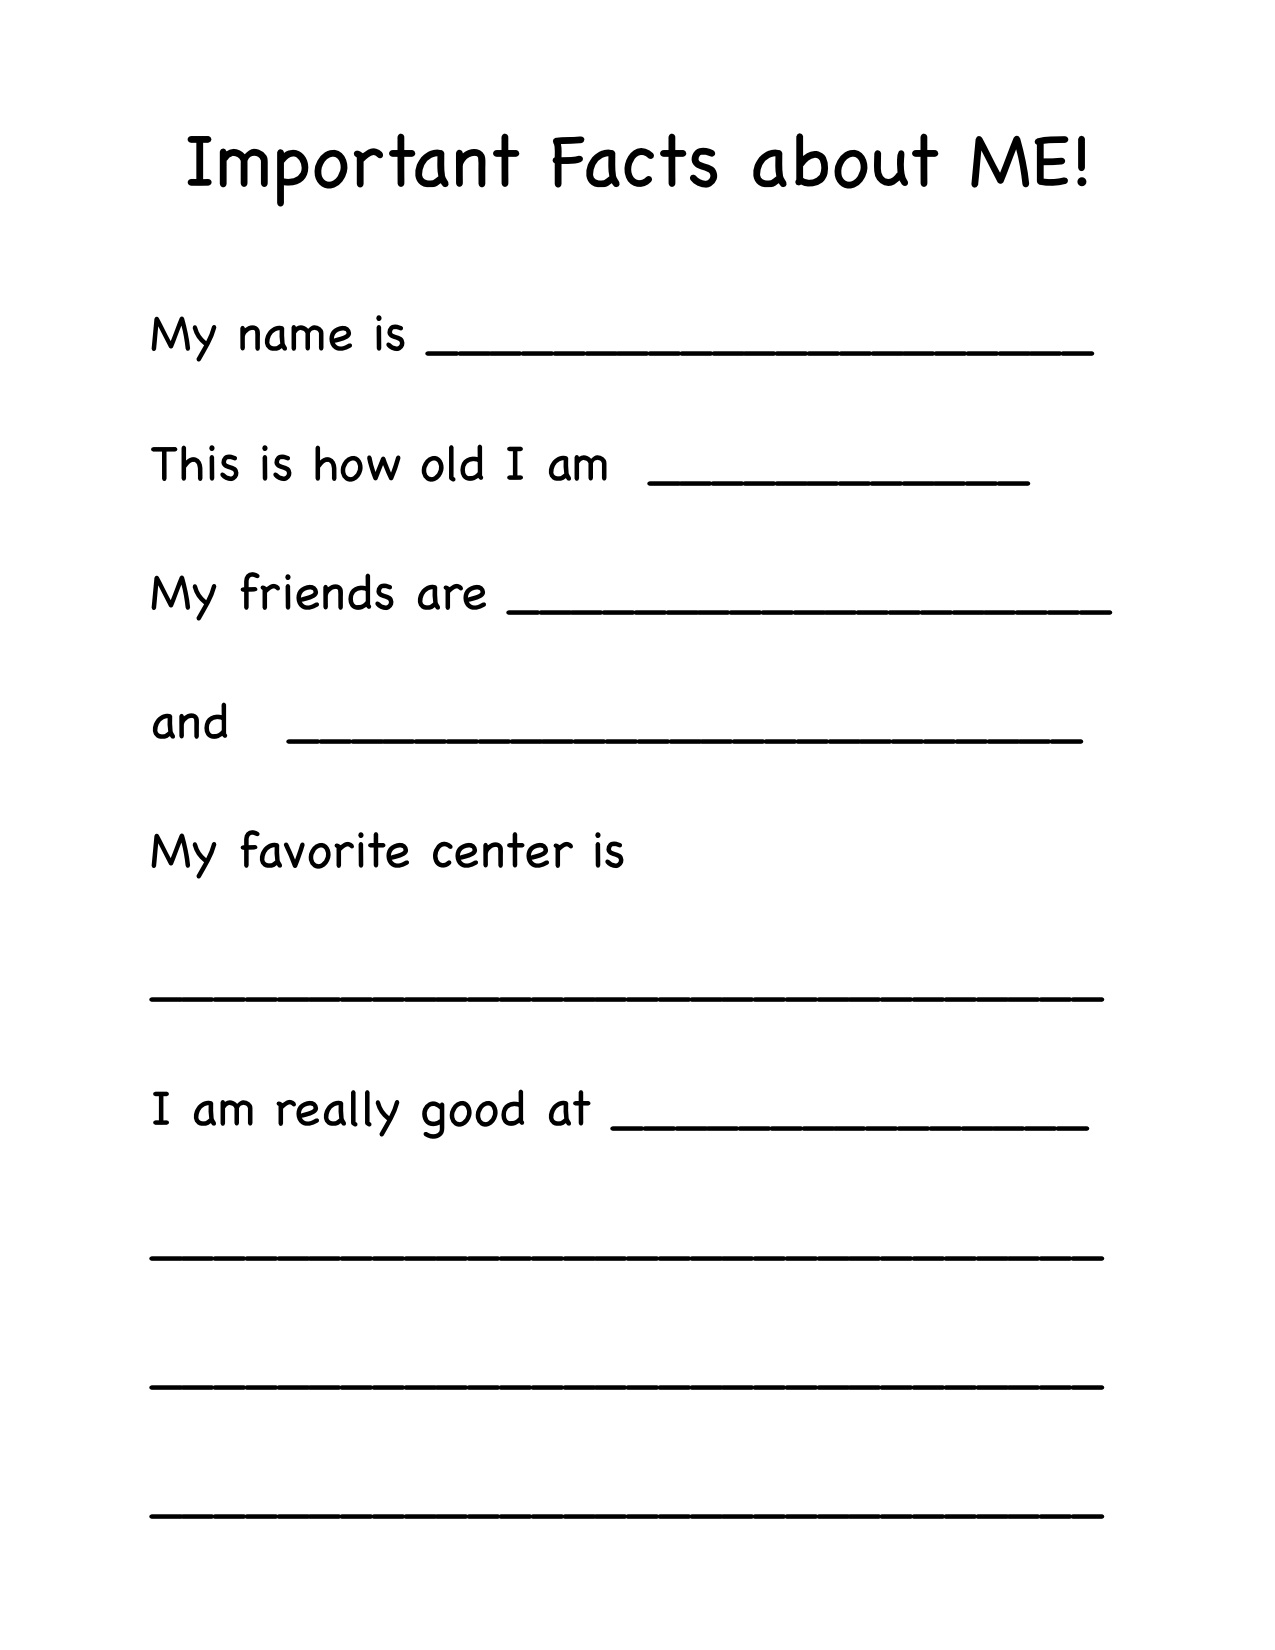 15-best-images-of-me-and-i-worksheets-all-about-me-preschool